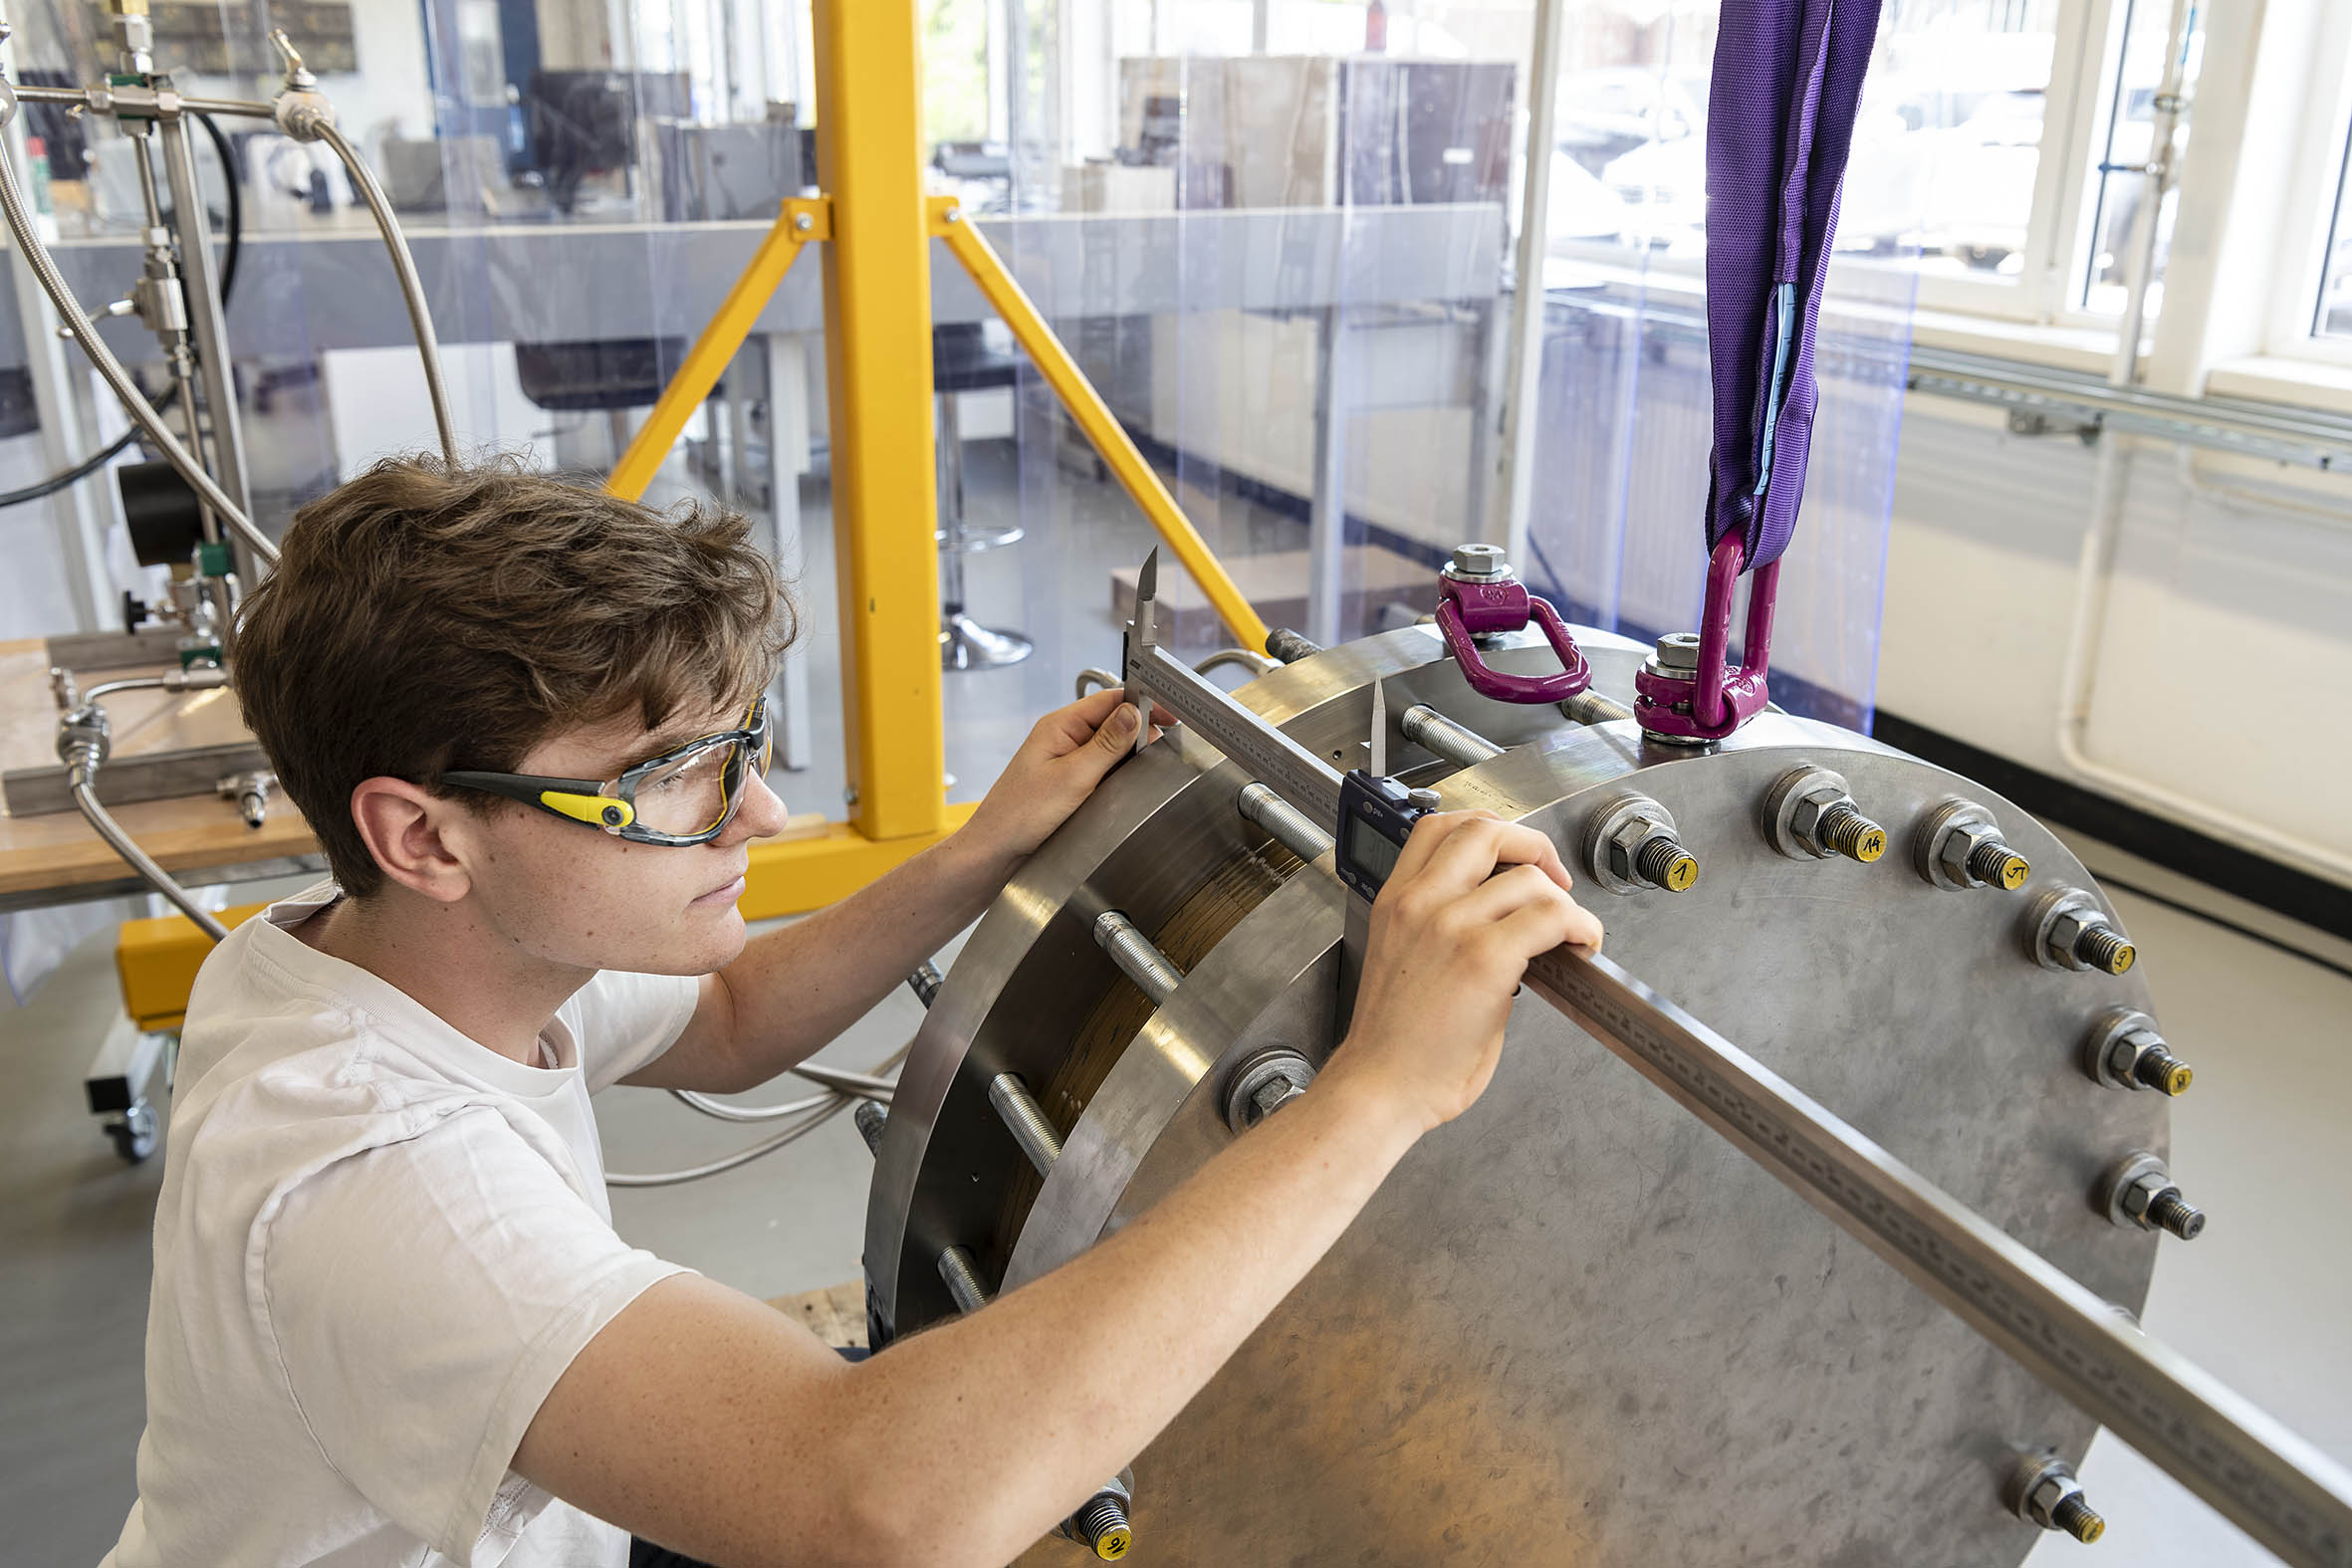 An Exion employee working on an Exion Hydrogen unit